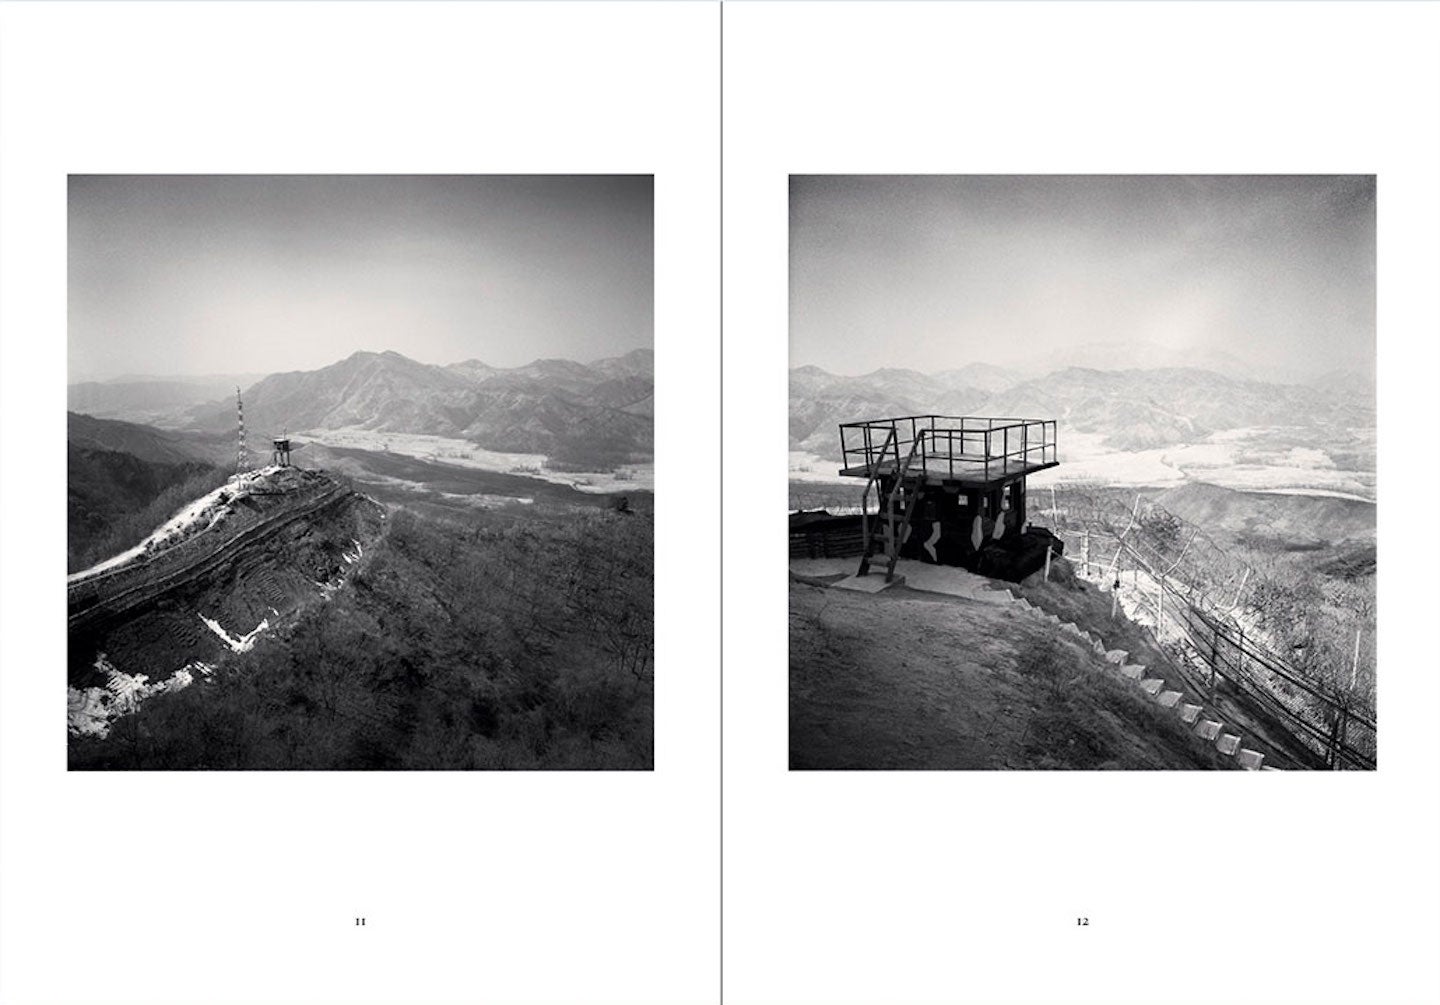 Nazraeli Press One Picture Book Two Series, Set 1: #1-4, Limited Edition(s) (with 4 Prints): Michael Kenna: DMZ (Korean Demilitarized Zone); Tony Mendoza: Florida Dogs; Betty Hahn: Lone Ranger; Carrie Mae Weems: Monument